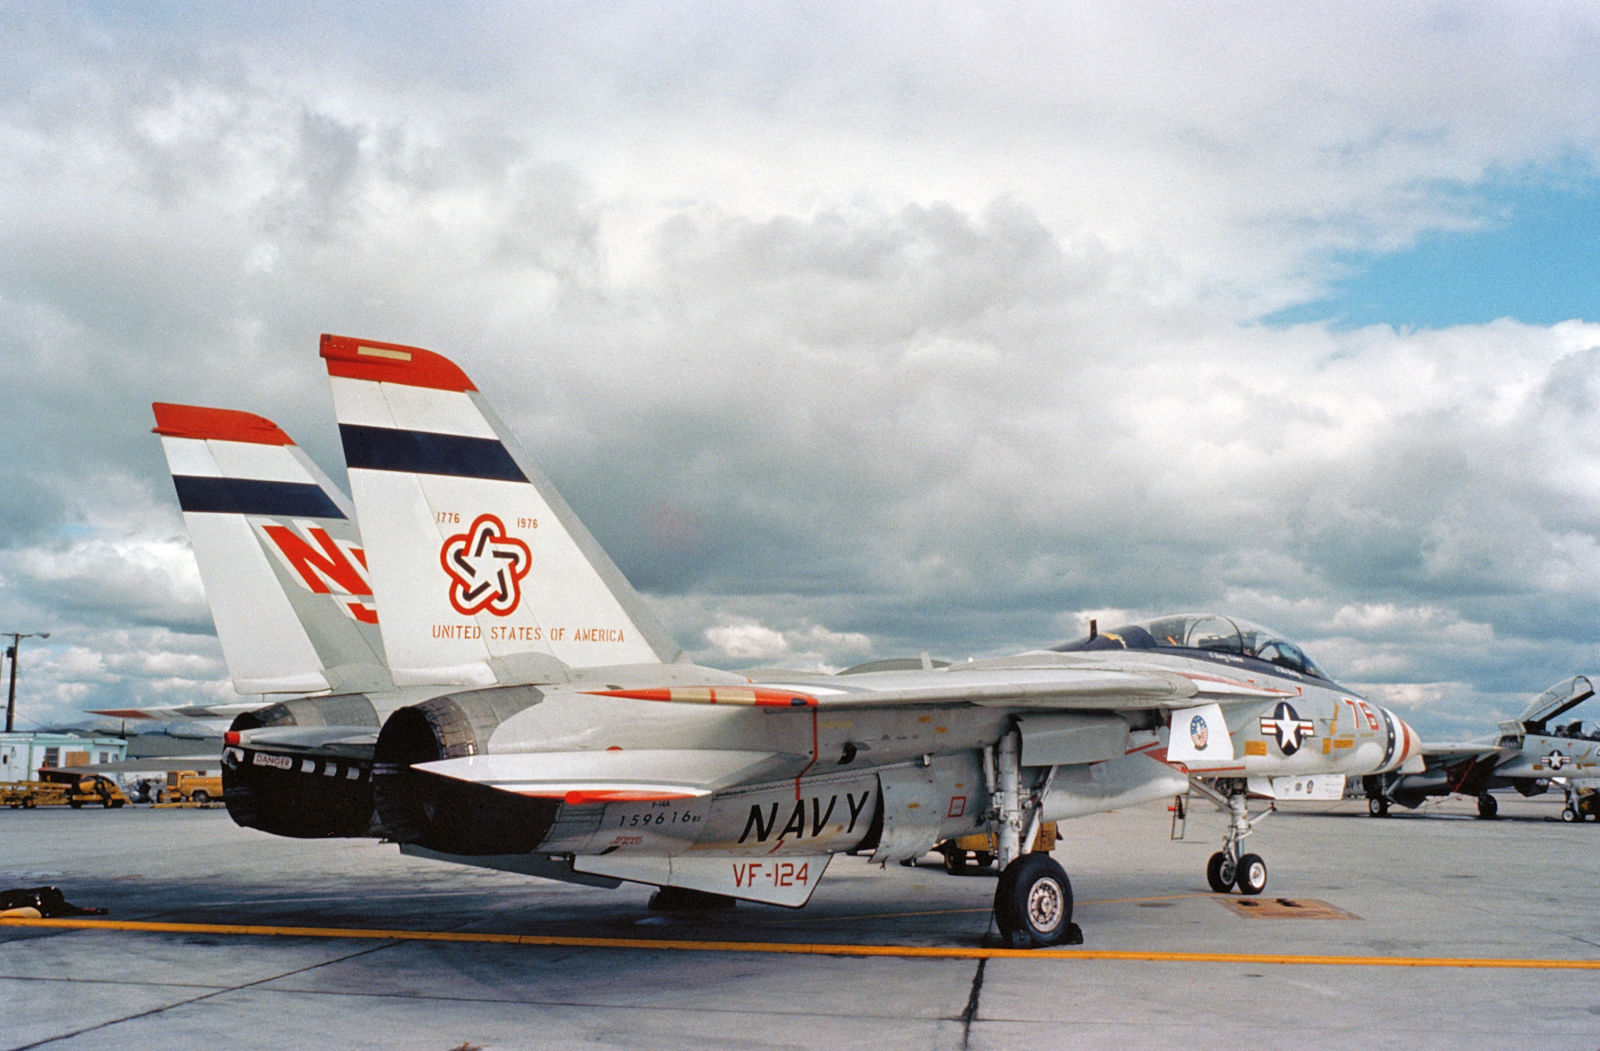 U.S. Navy Grumman F-14A Tomcat aircraft (BuNo 159616) of fleet replacement squadron VF-124 Gunfighters parked on the flight line at Naval Air Station Miramar, California (USA), on 1 April 1976.